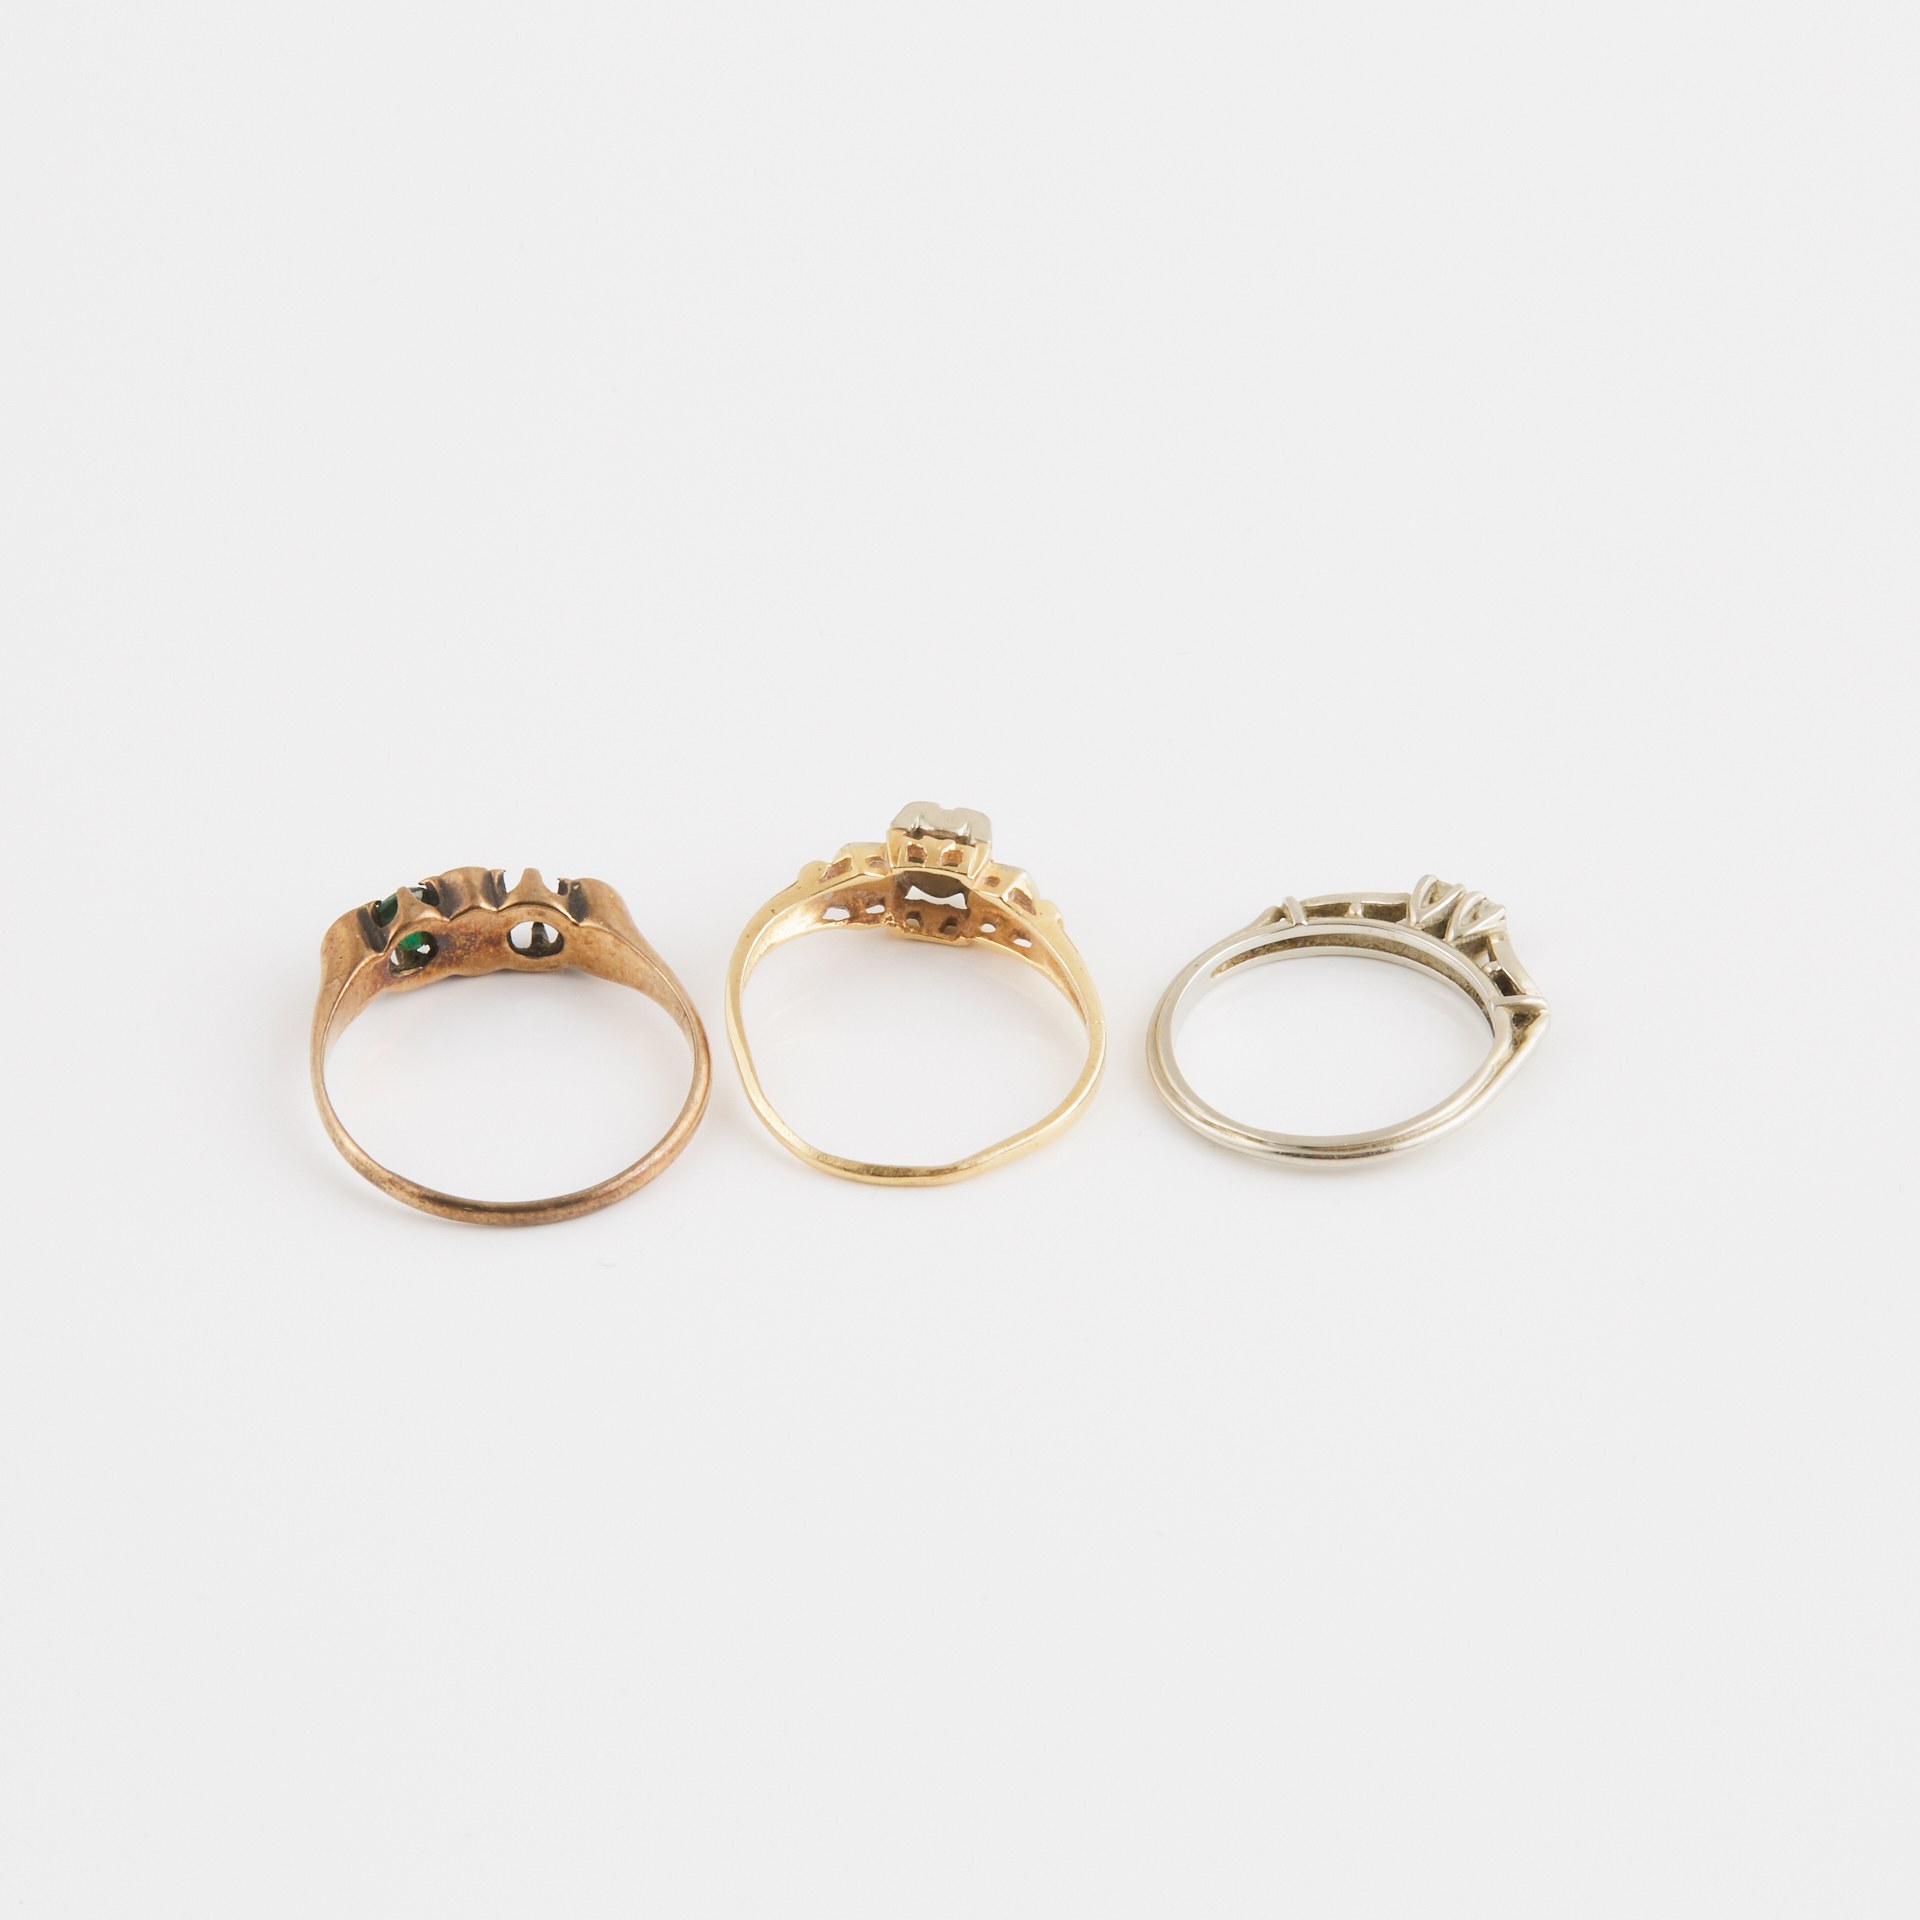 1 x 10k And 2 x 14k Gold Rings